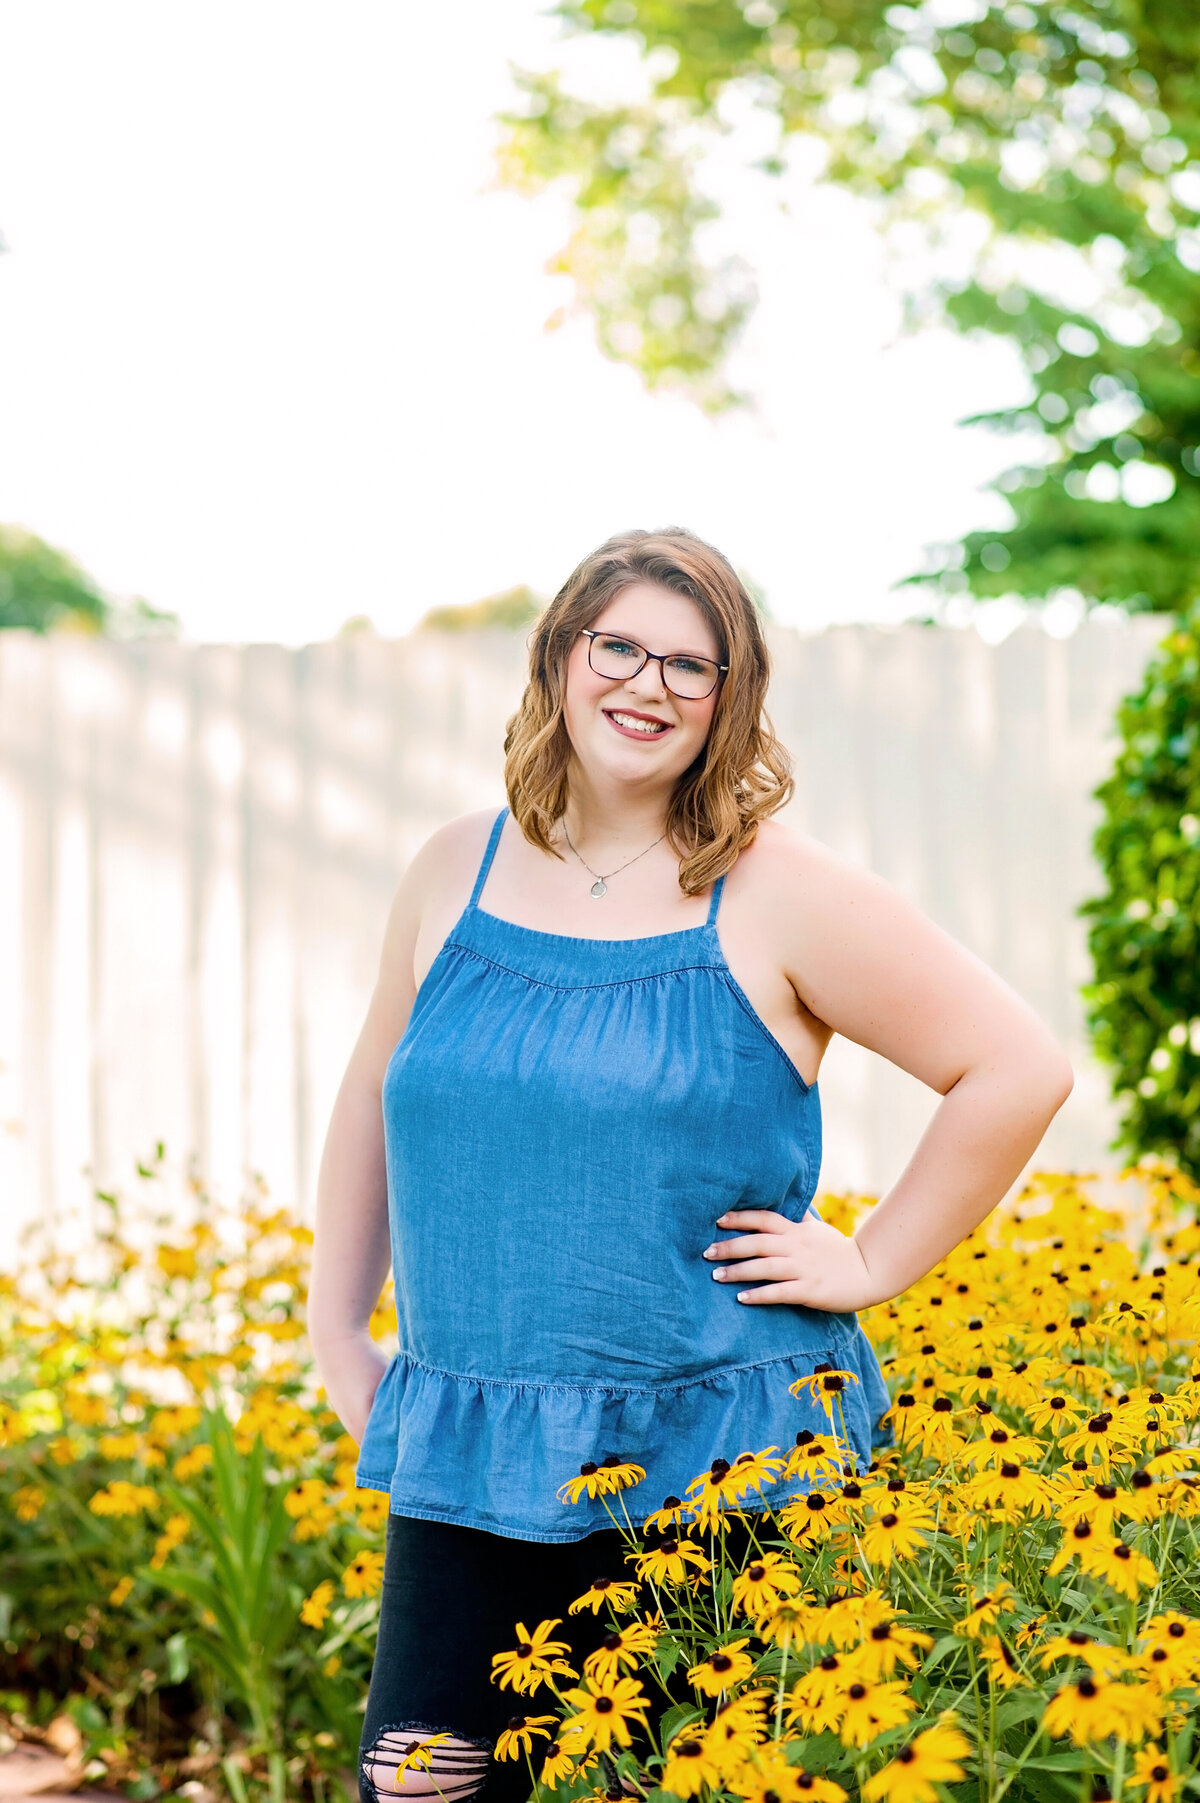 Mechanicsville high school senior girl wearing denim top poses with yellow flowers at Amber Grove venue for her senior pictures.